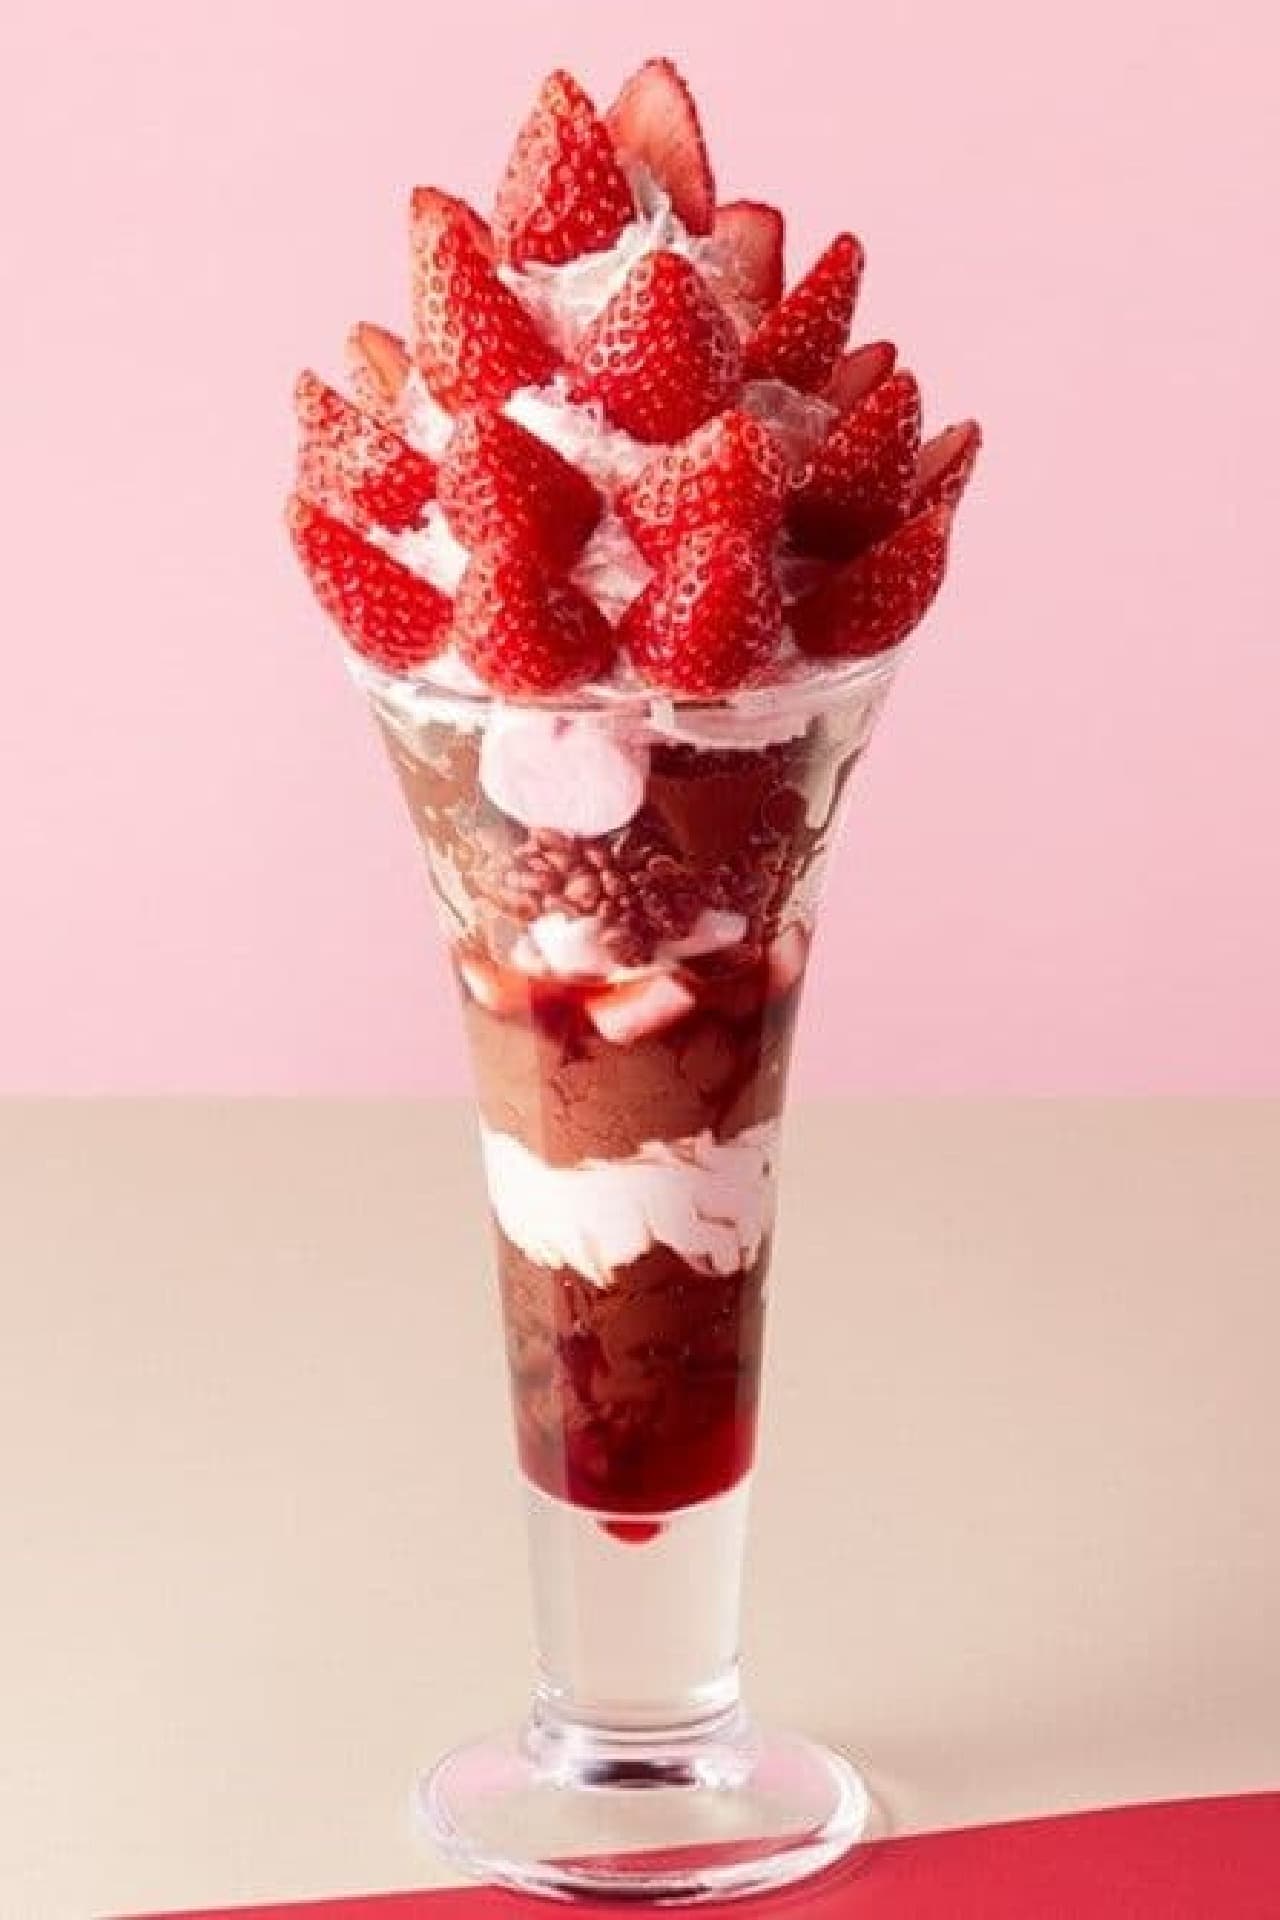 Coco's "Strawberry and Chocolate Queen Parfait"